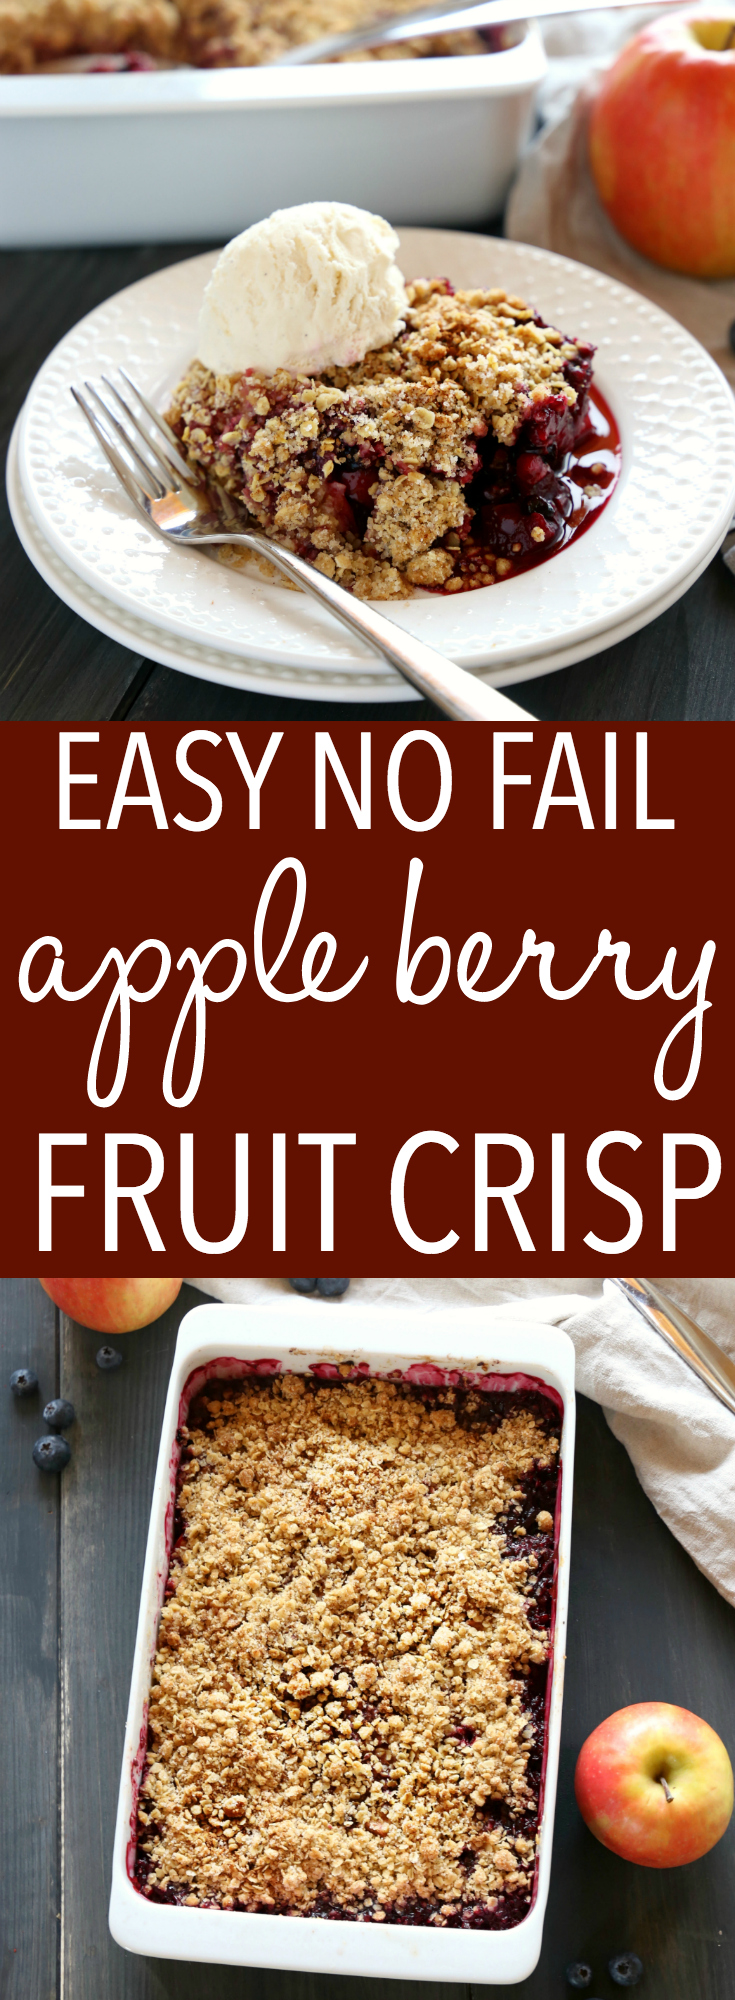 This Easy Apple Berry Fruit Crisp is the perfect easy dessert for beginning bakers! Just a few simple ingredients stand between you and this delicious, healthier dessert! Make it with fresh or frozen fruit, and gluten-free! Recipe from thebusybaker.ca! #howtomakeapplecrisp #easyapplecrisp #fruitcrisp #healthydessert via @busybakerblog